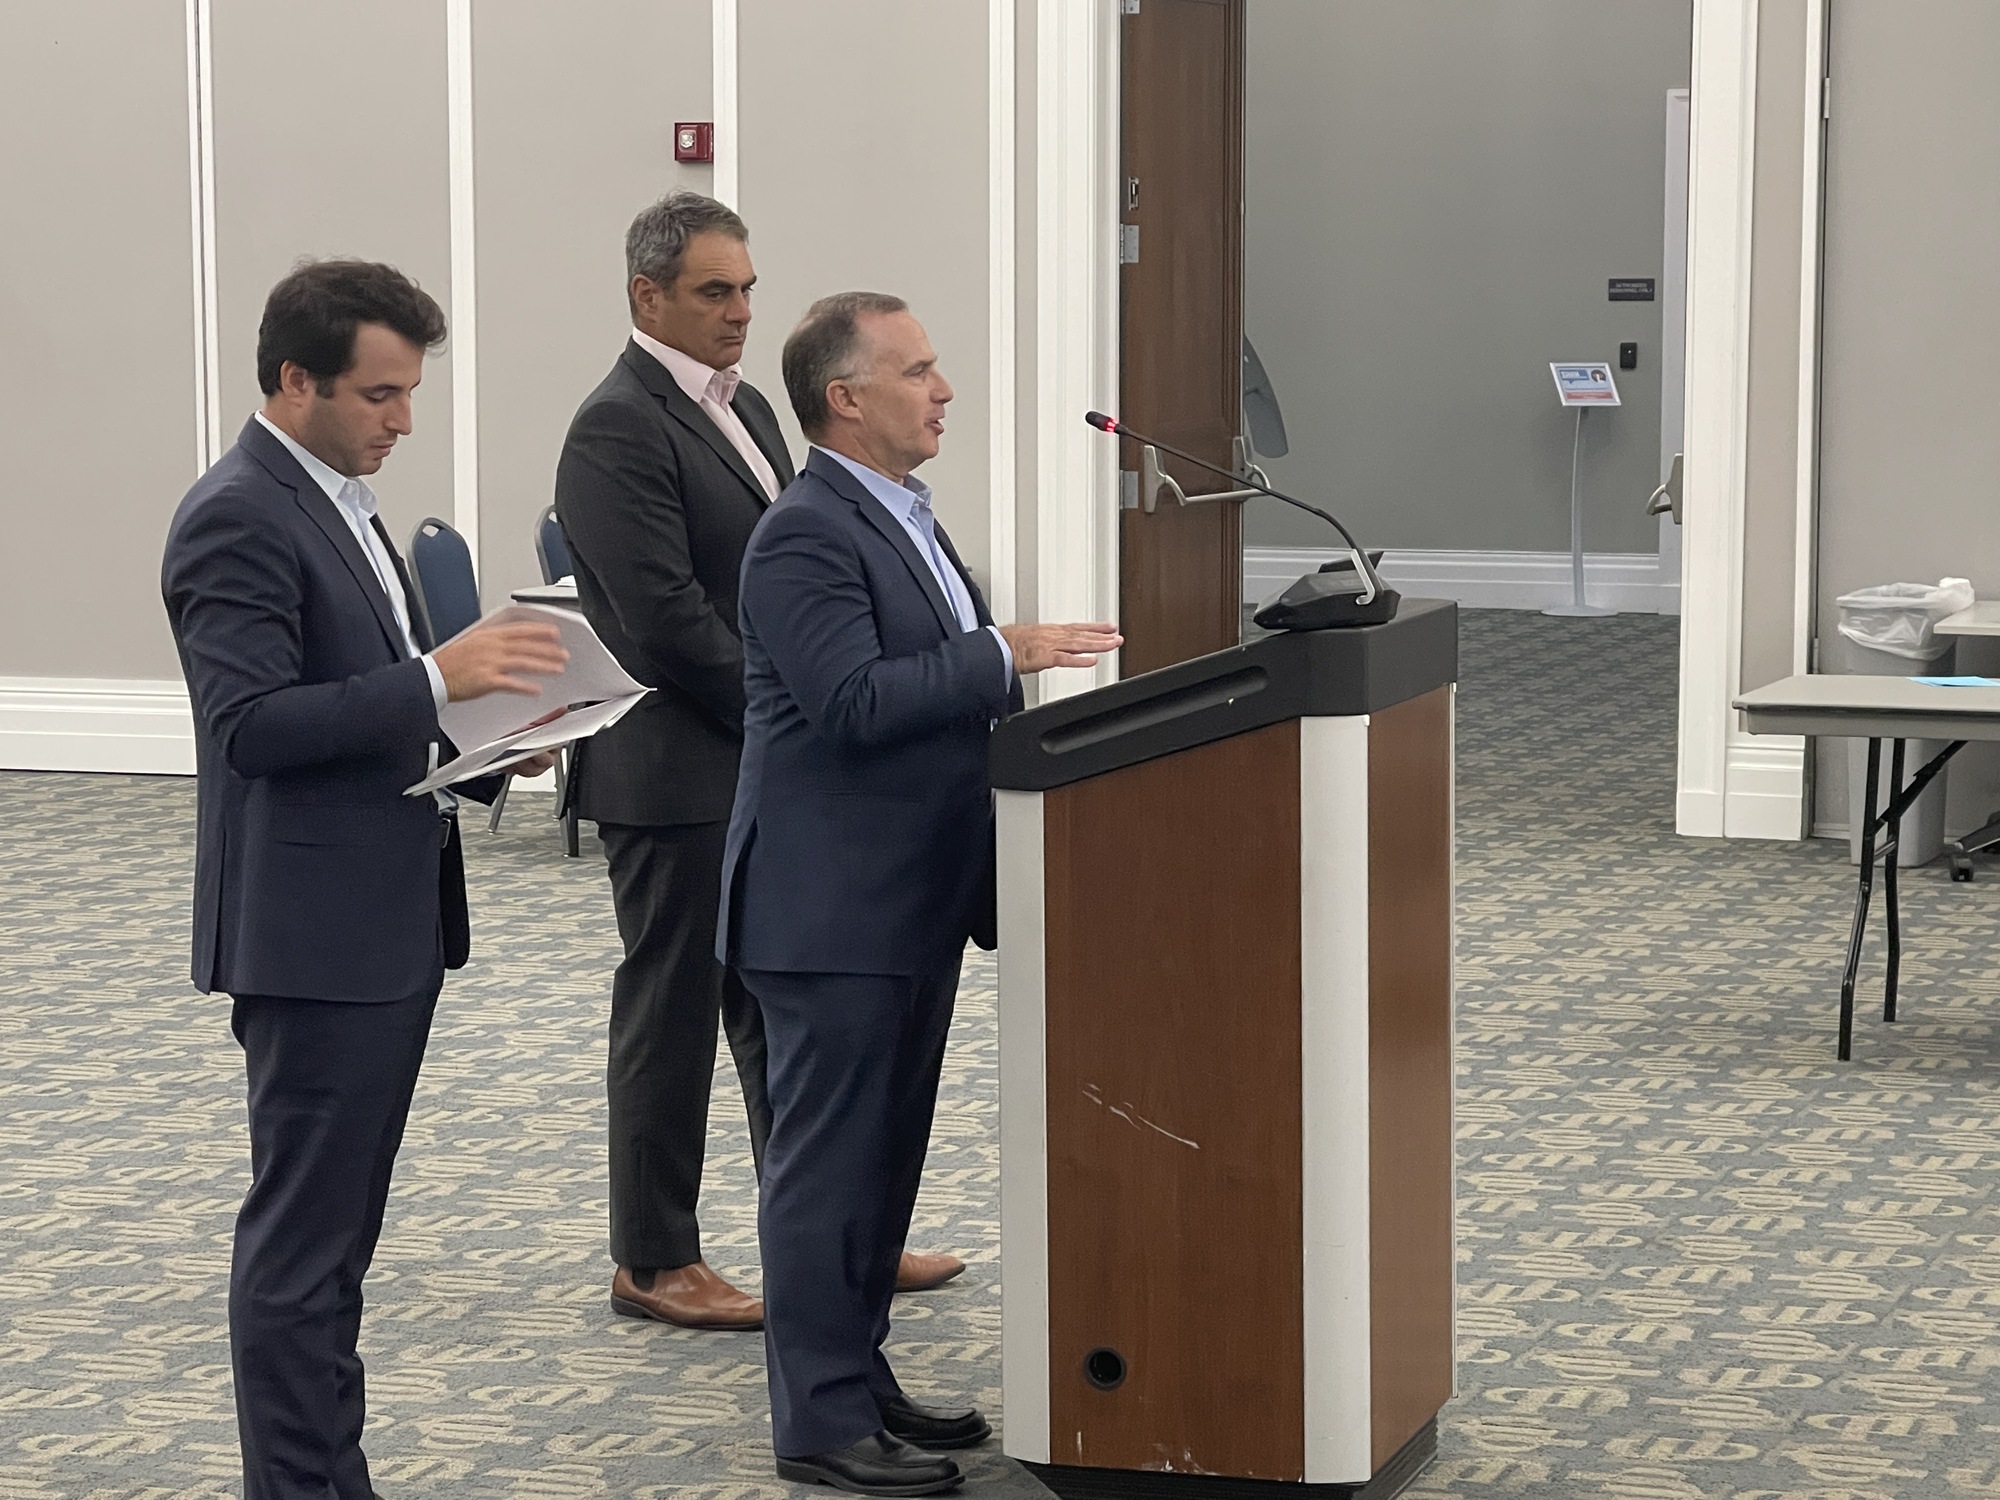 From left, Fetner Property Acquisitions and Development Associate Alex Fetner; CEO Hal Fetner; and COO Damon Pazzaglini.